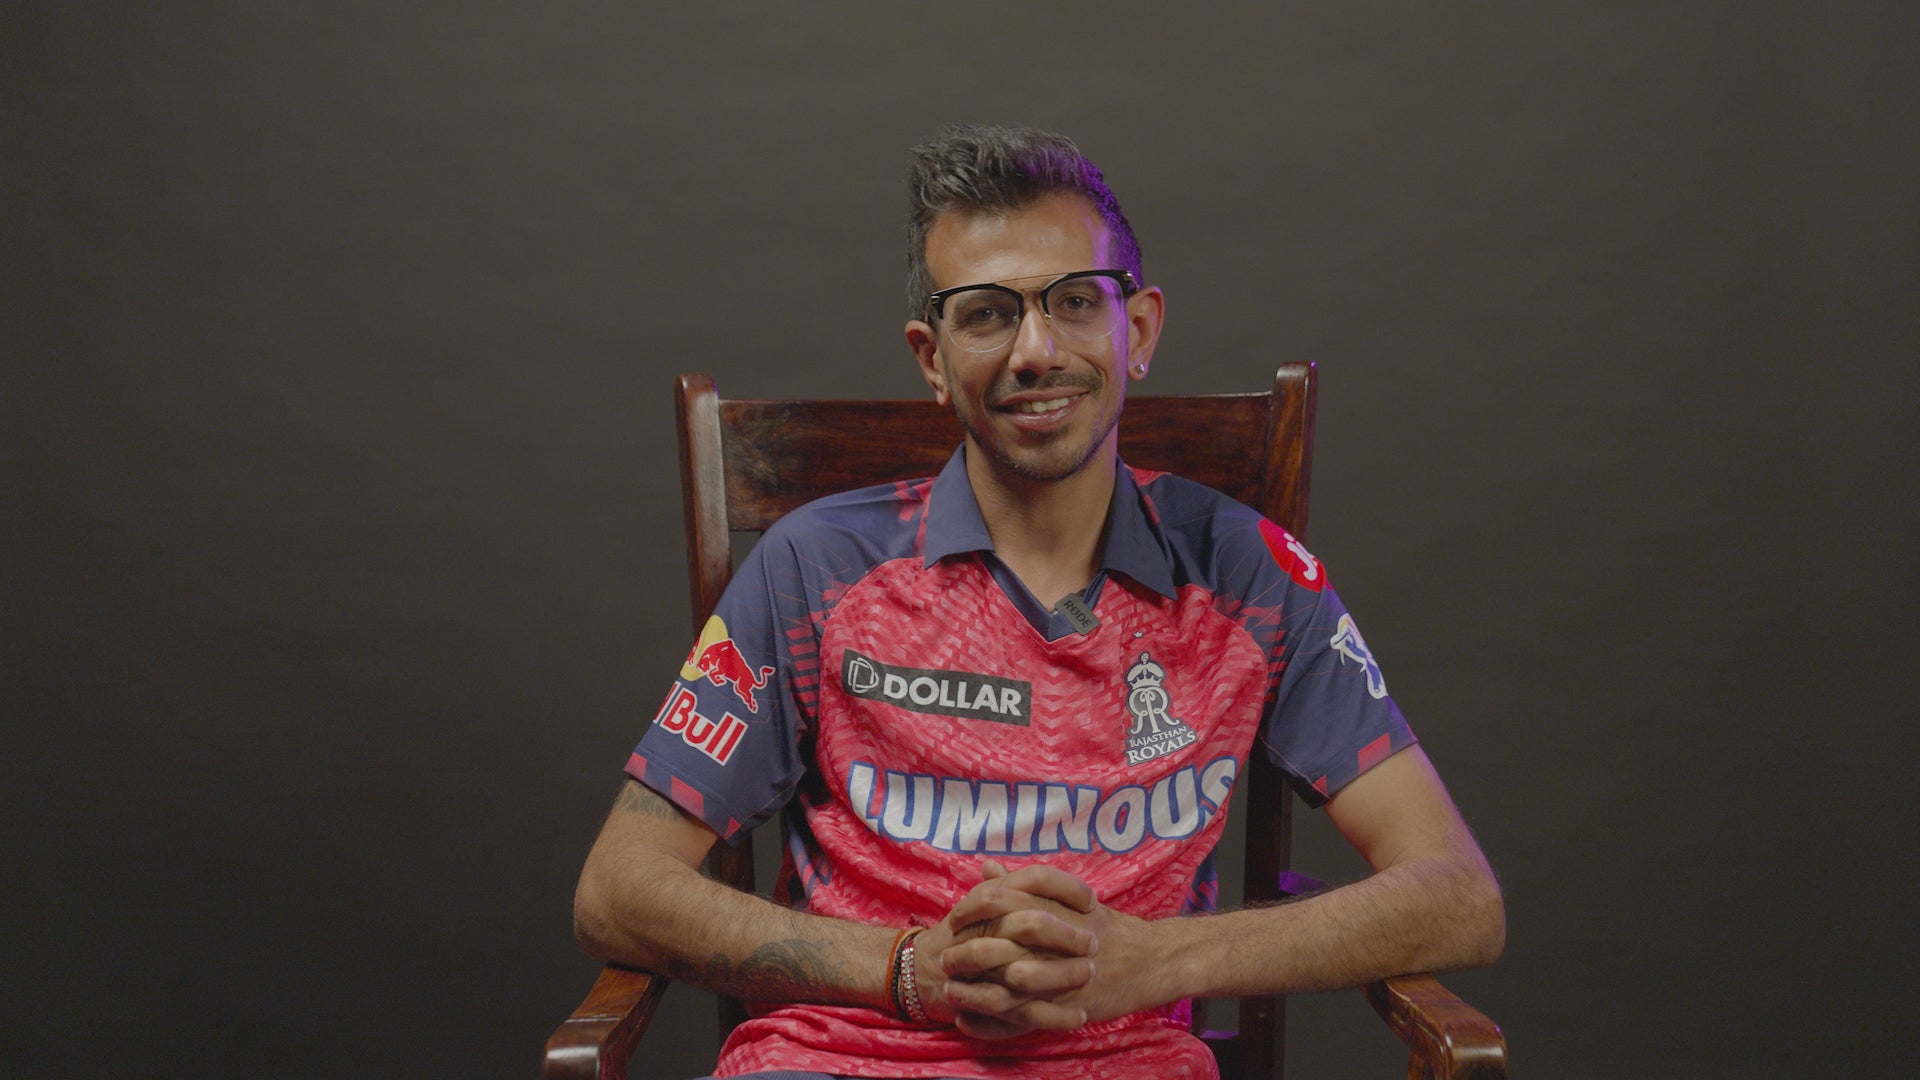 A fun rapid fire session with Royals' star players on JioTV